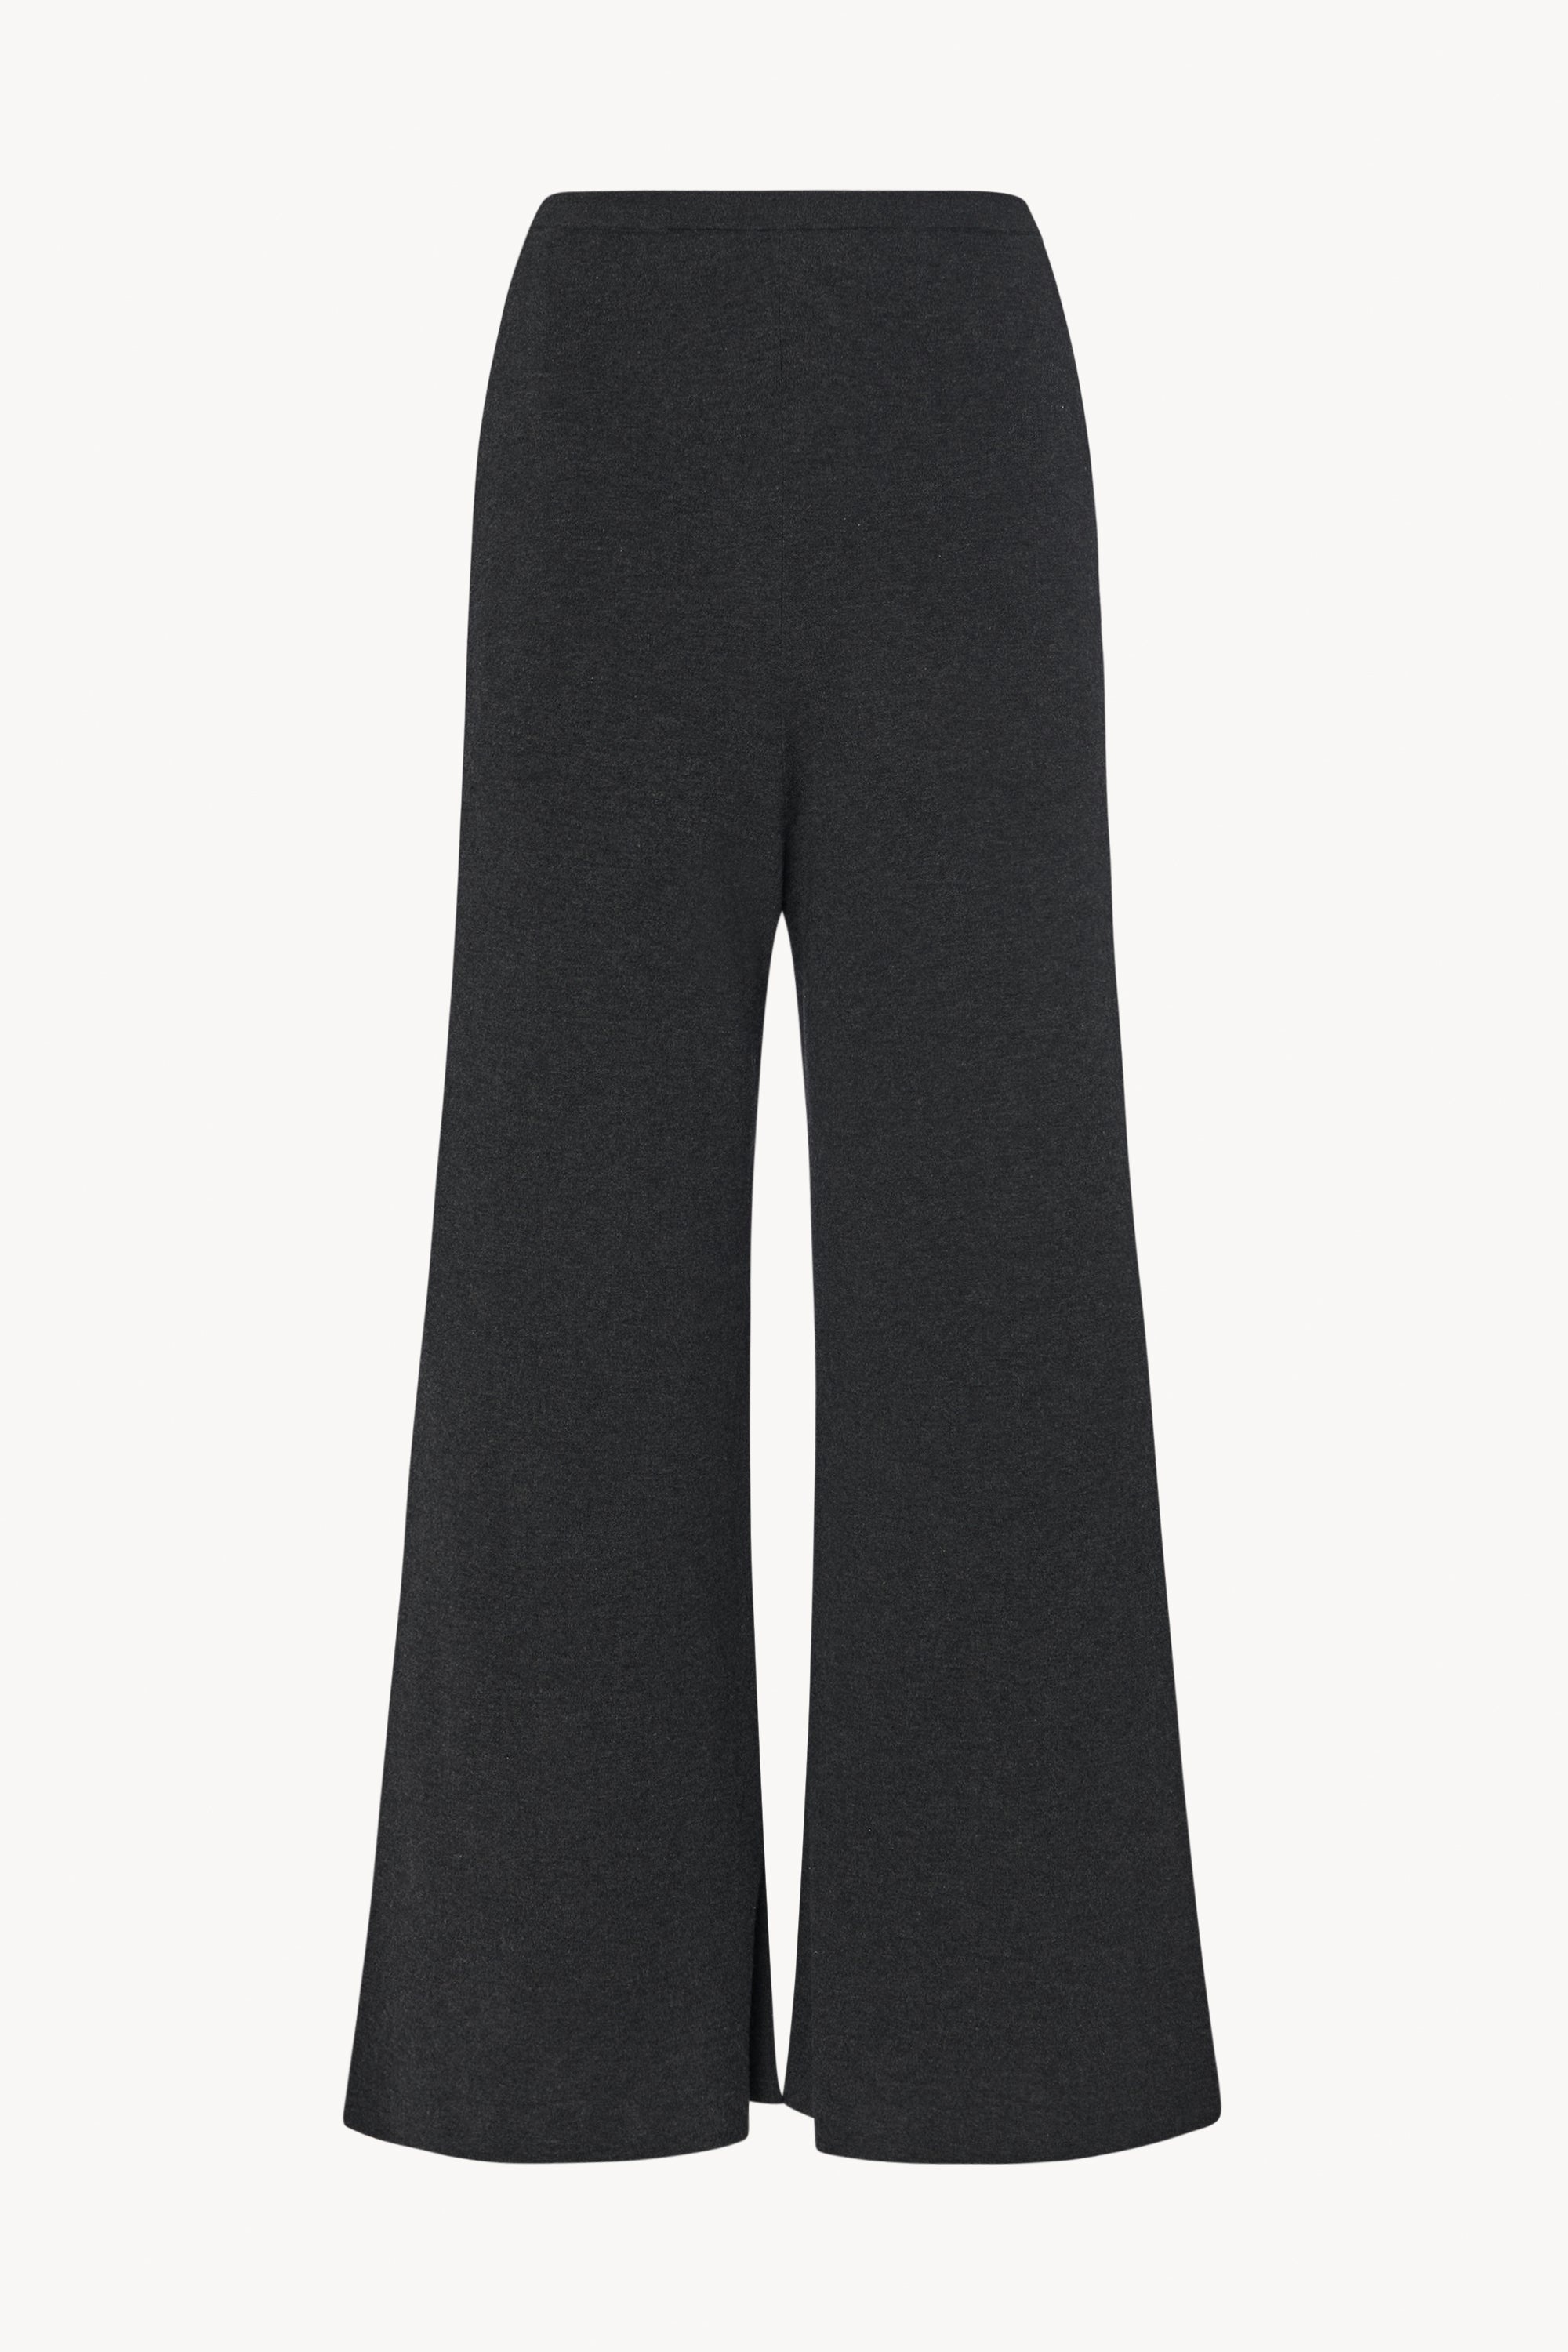 Folondo Pants in Cotton and Cashmere - 2